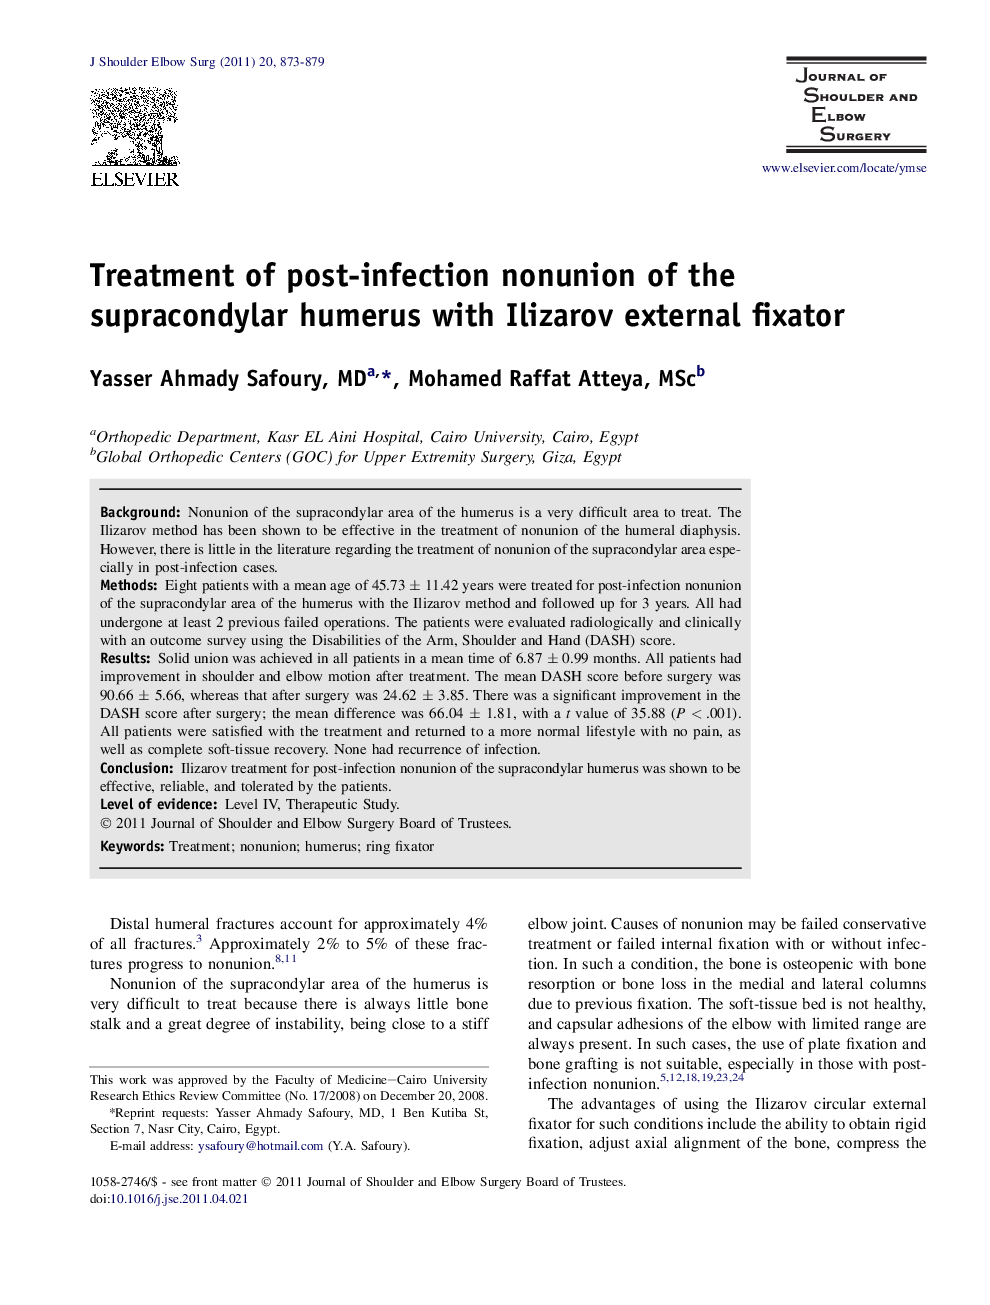 Treatment of post-infection nonunion of the supracondylar humerus with Ilizarov external fixator 